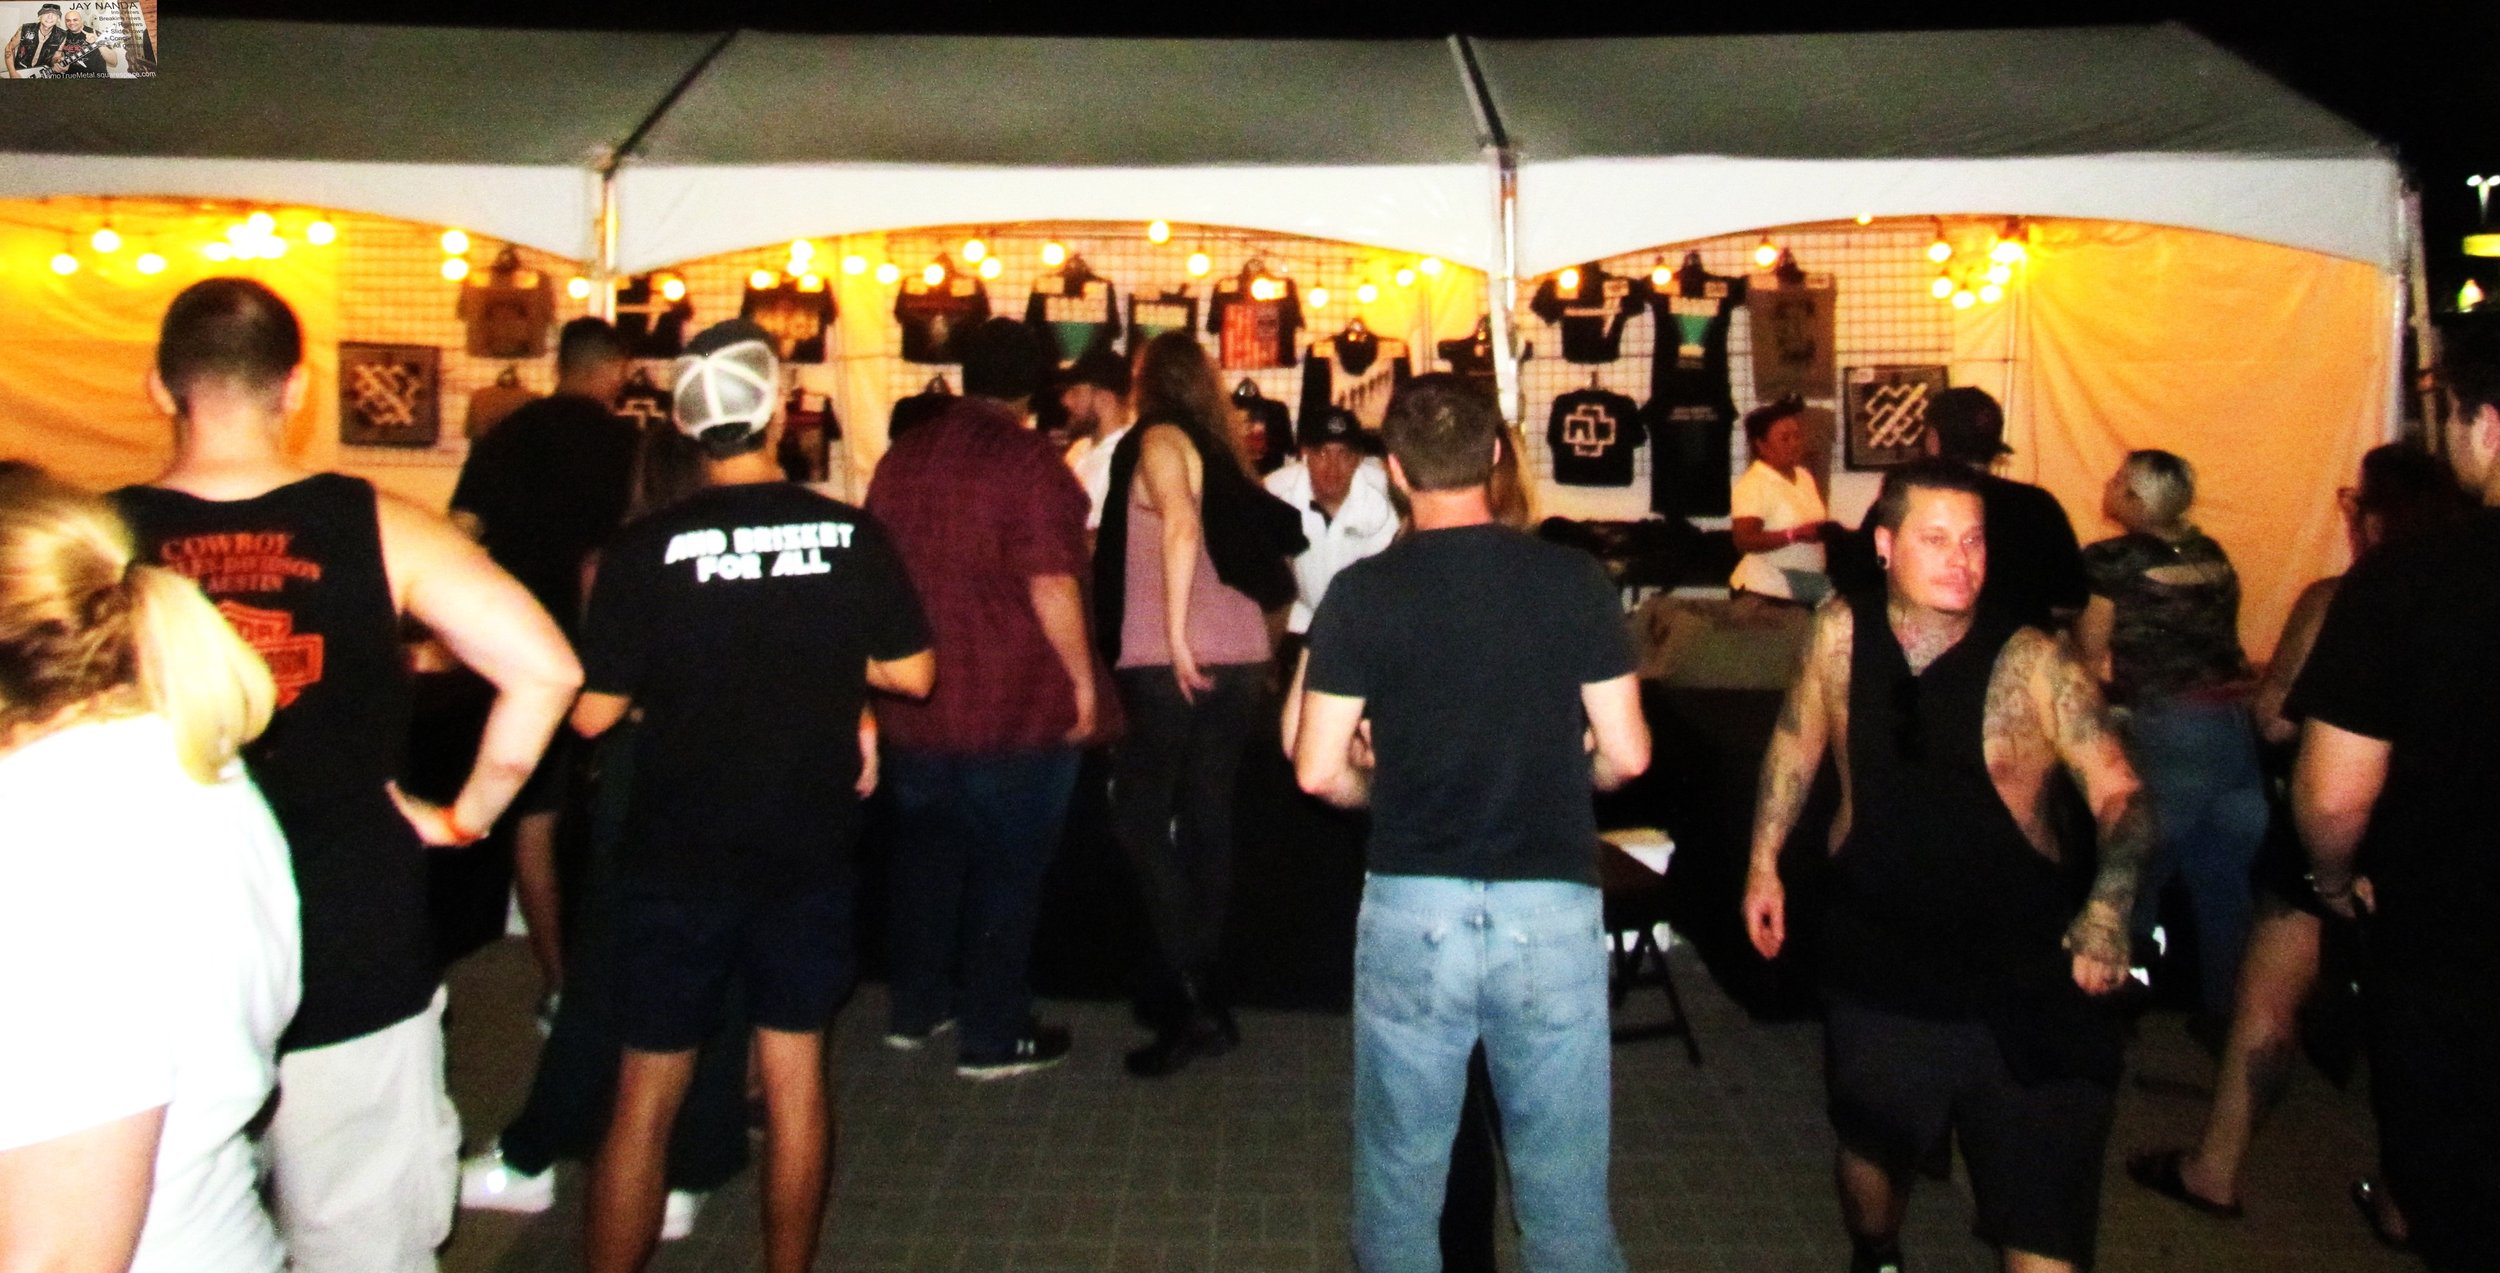  Fans partake in buying $40 T-shirts outside the dome after the 21-song, 2 1/2-hour plus show. 